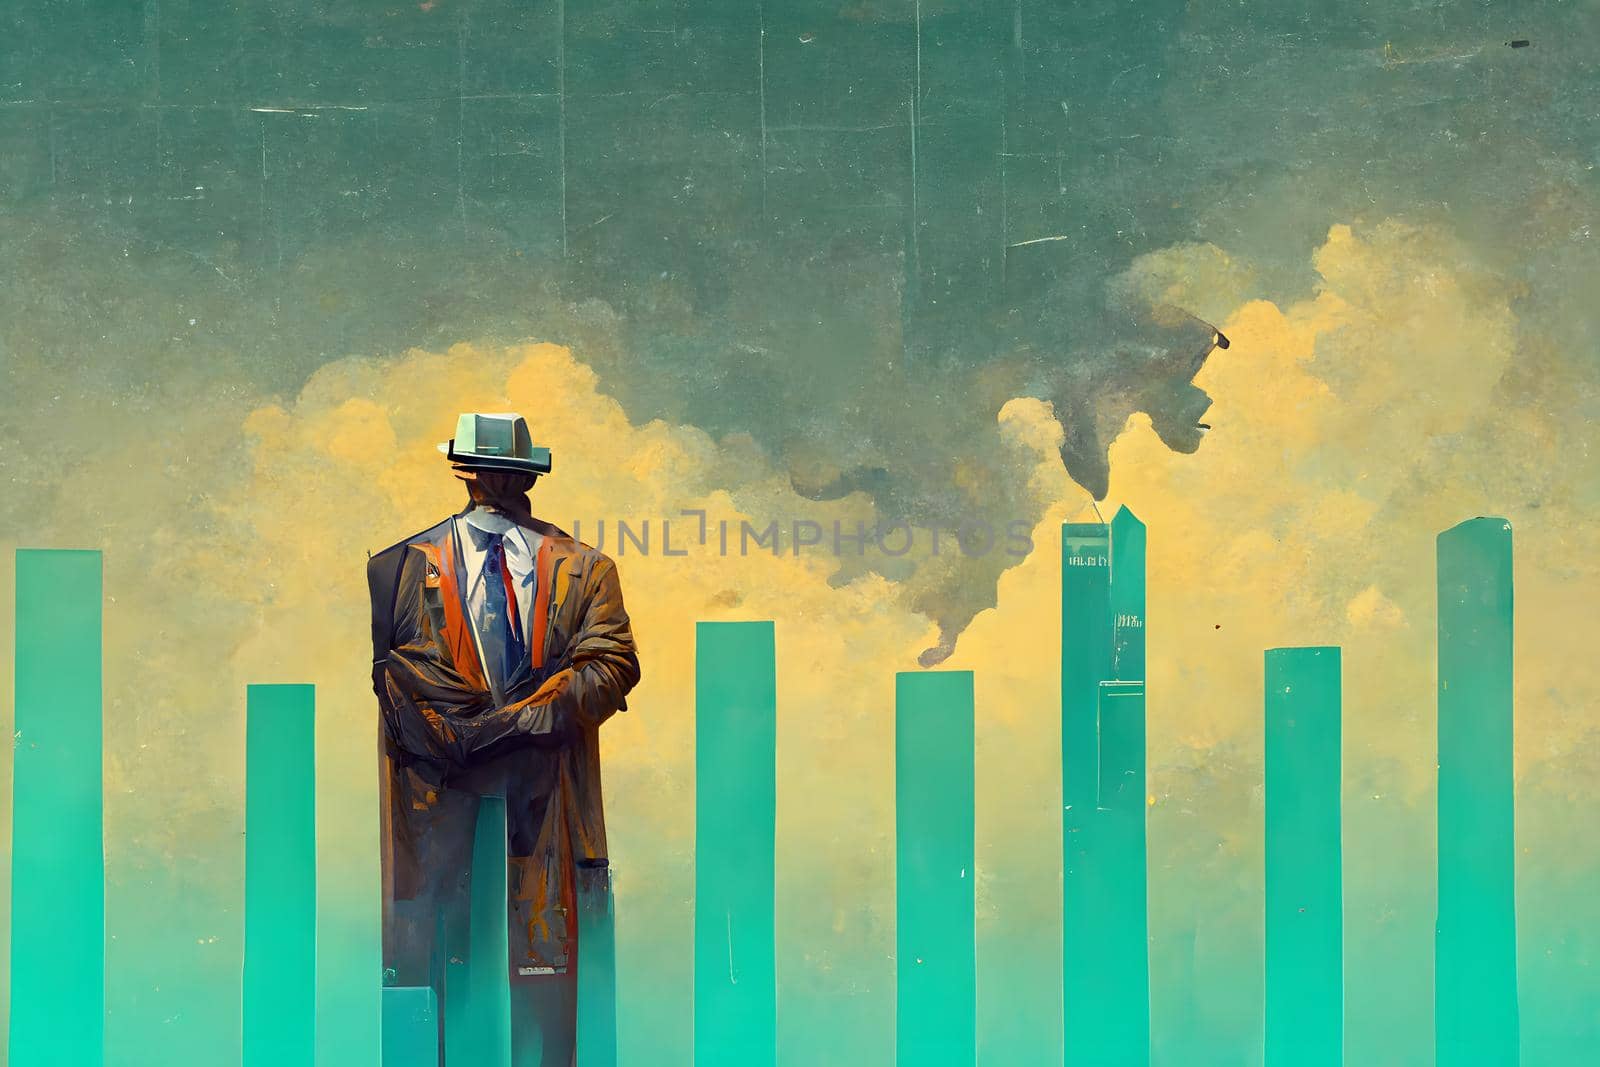 grotesque cartoon business man figure in front of bizarre styled charts and skyscrapers, neural network generated art by z1b